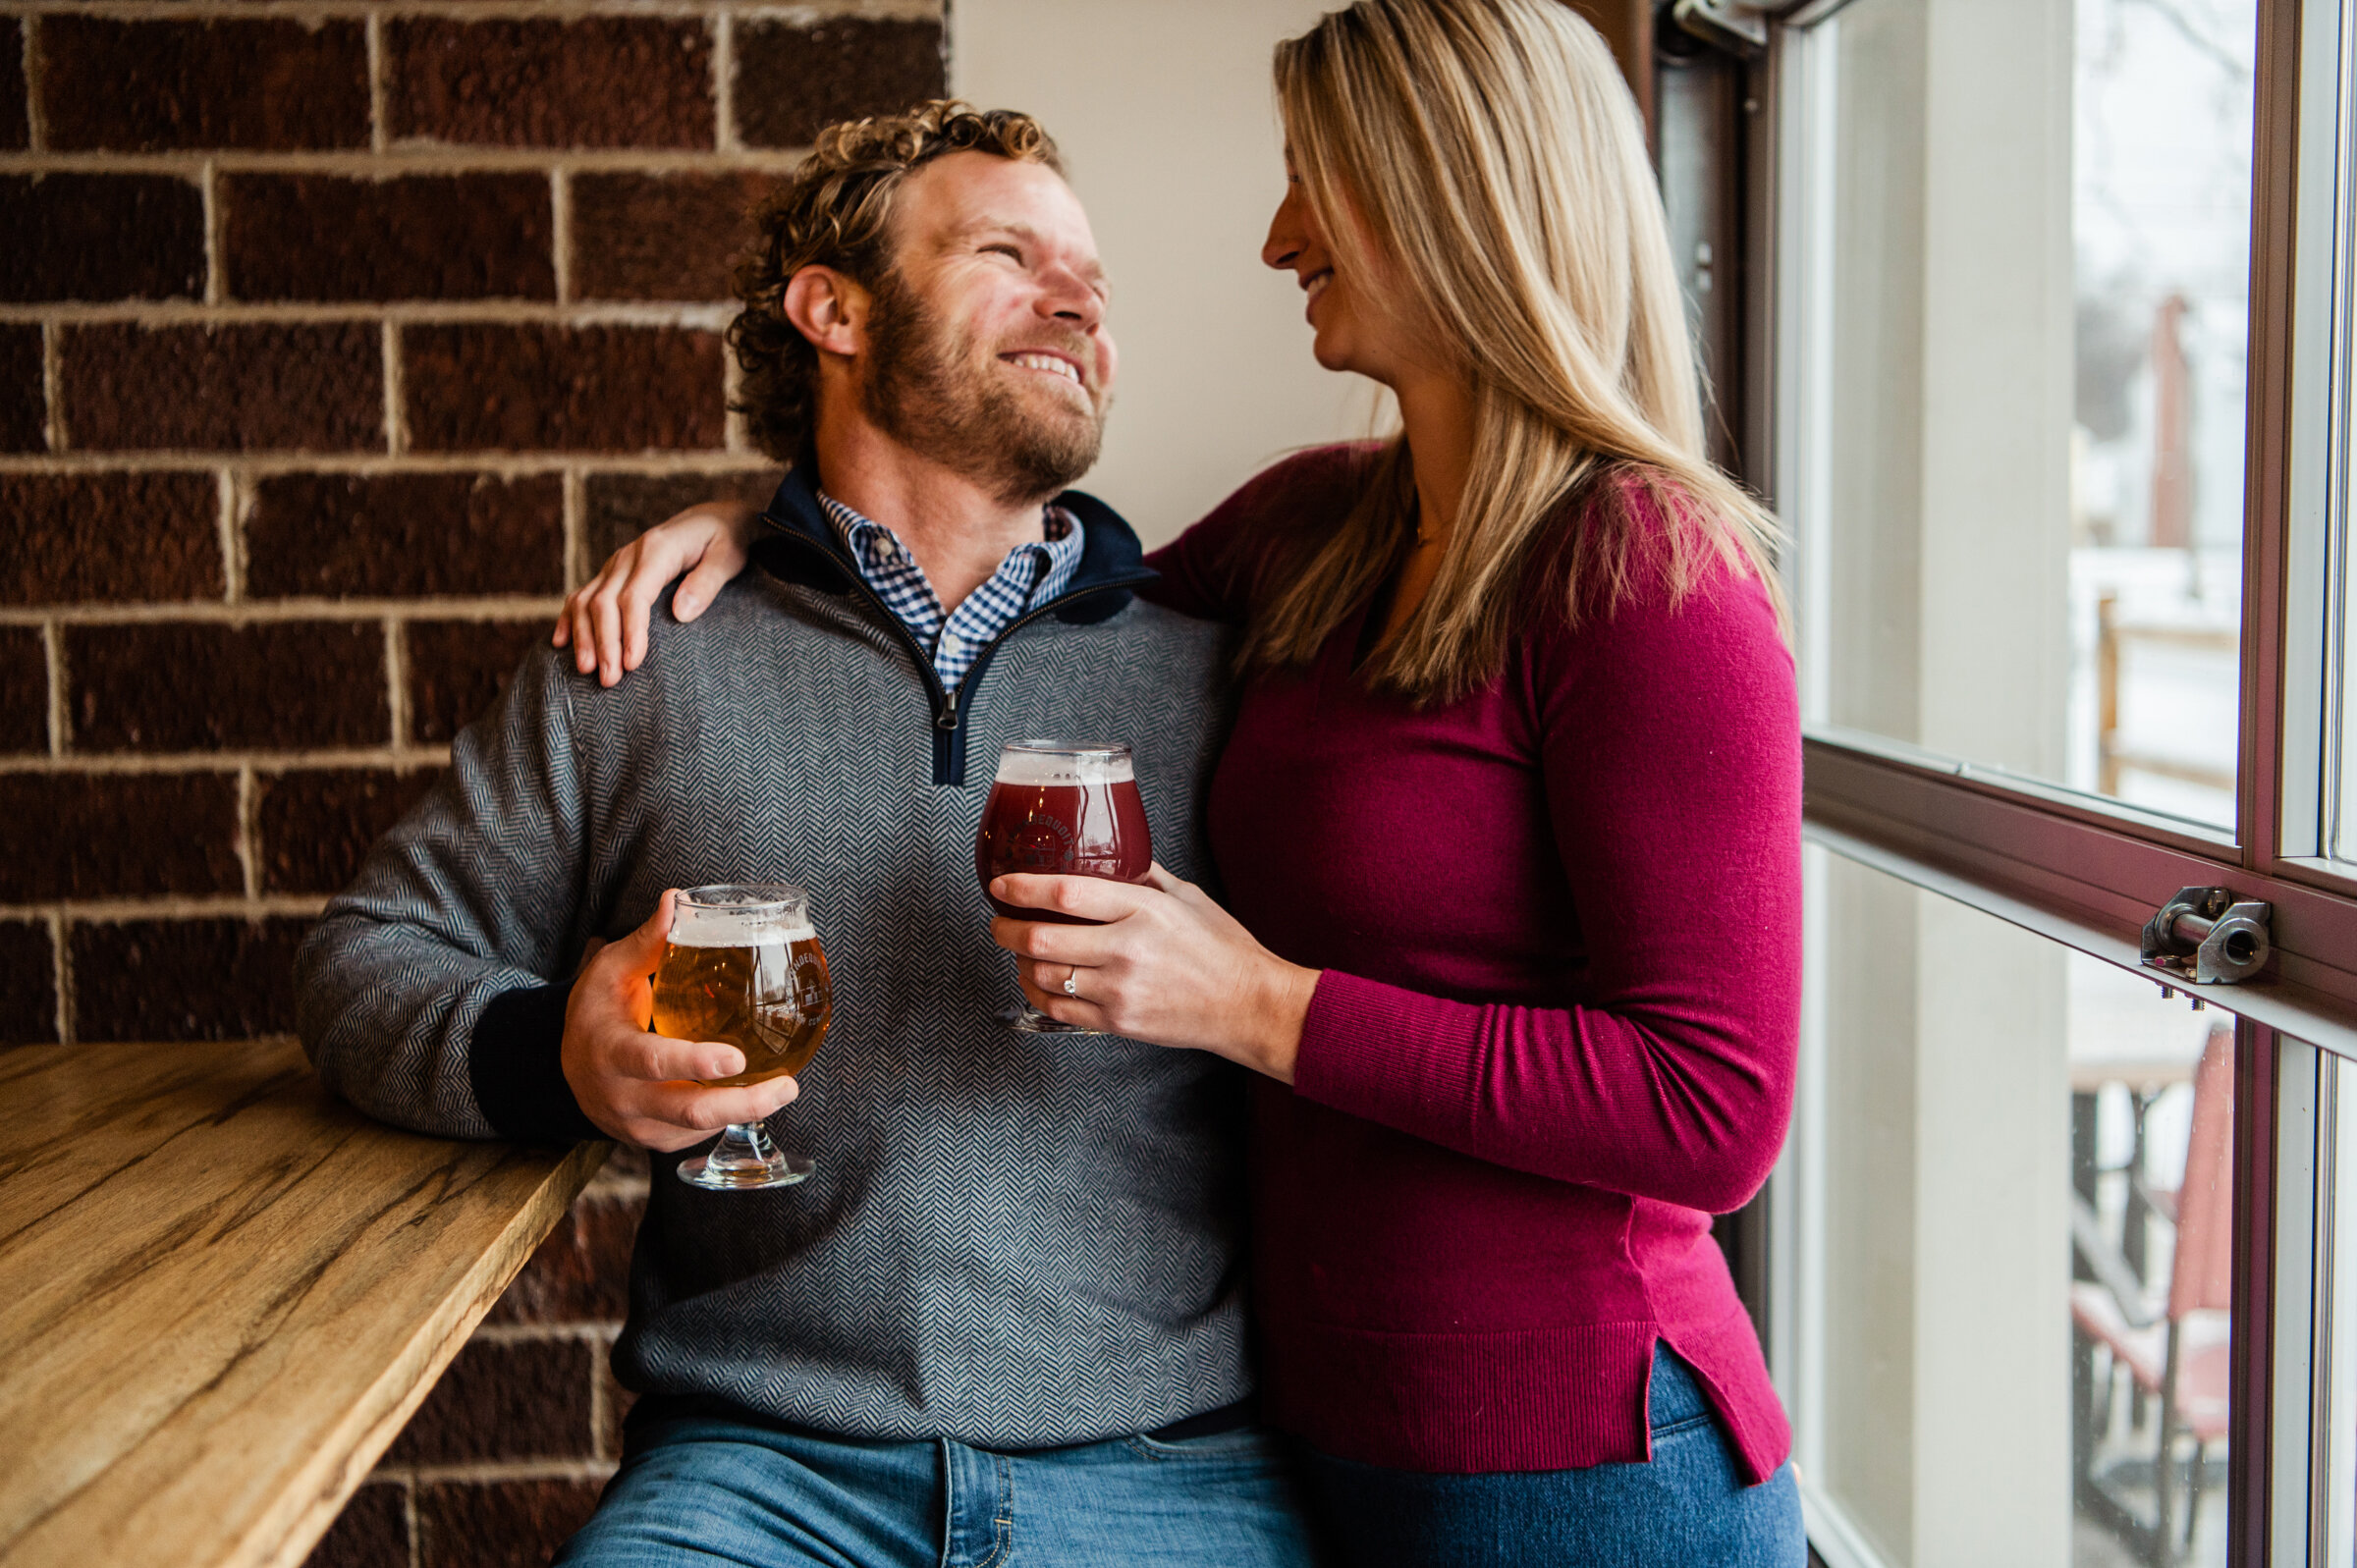 Irondequoit_Beer_Company_Durand_Eastman_Park_Rochester_Engagement_Session_JILL_STUDIO_Rochester_NY_Photographer_6997.jpg